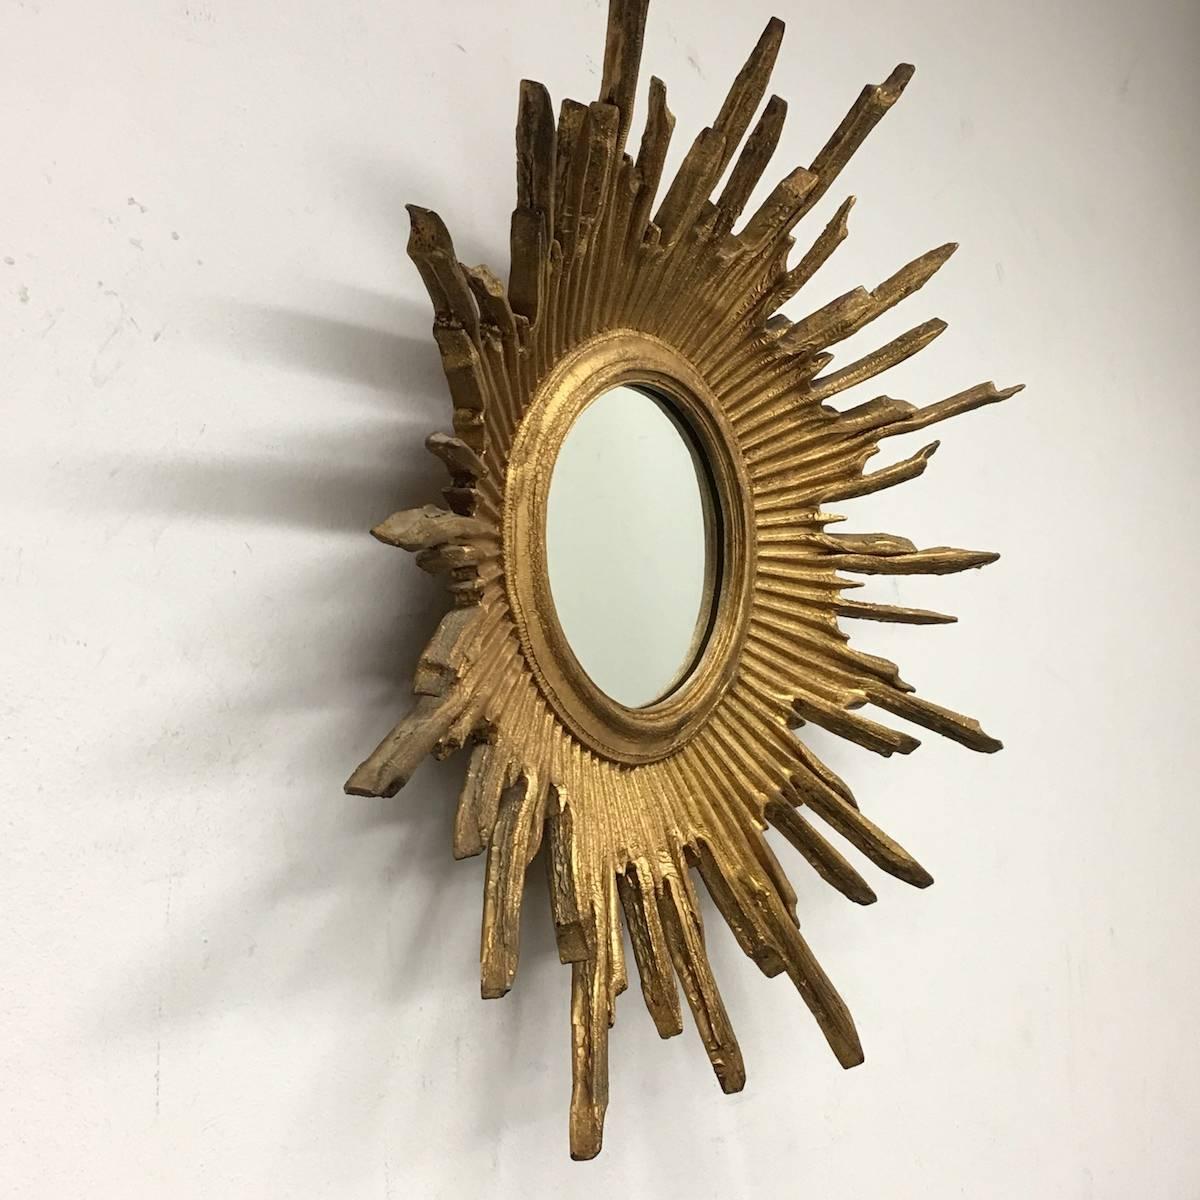 Gorgeous starburst mirror. 
Made of gilded Resin.
No chips, no cracks, no repairs.
Probably little dusty, but this is old-age.
It measures approximate 24 1/2"; in diameter,
Mirror only is approximate 7"; in diameter.
It stands